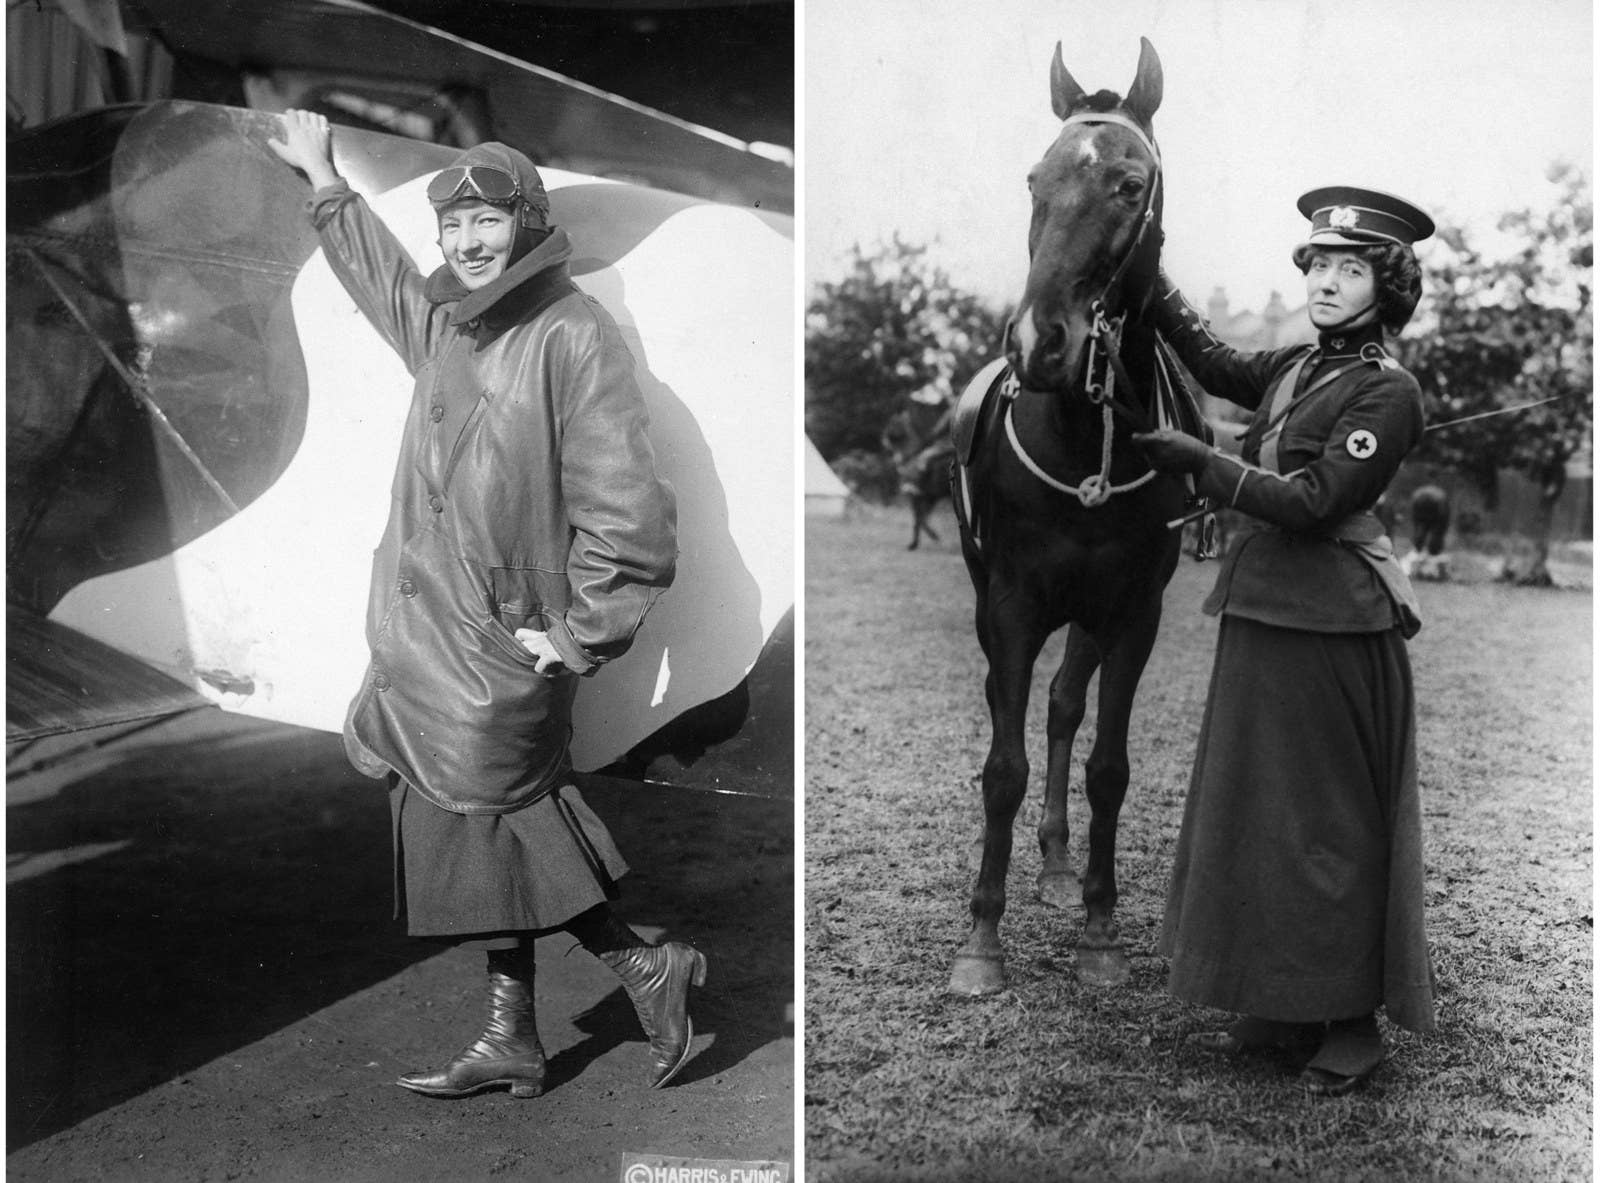 Left: Pilot Marjorie Stinson poses beside her aircraft, wearing a dress underneath a large bomber jacket and a pilot&#x27;s cap with glasses, 1917. Right: Mabel St Clair Stobart in the field, circa 1913. She founded the Women&#x27;s Sick and Wounded Convoy Corps, and organized hospitals in Europe during World War I.